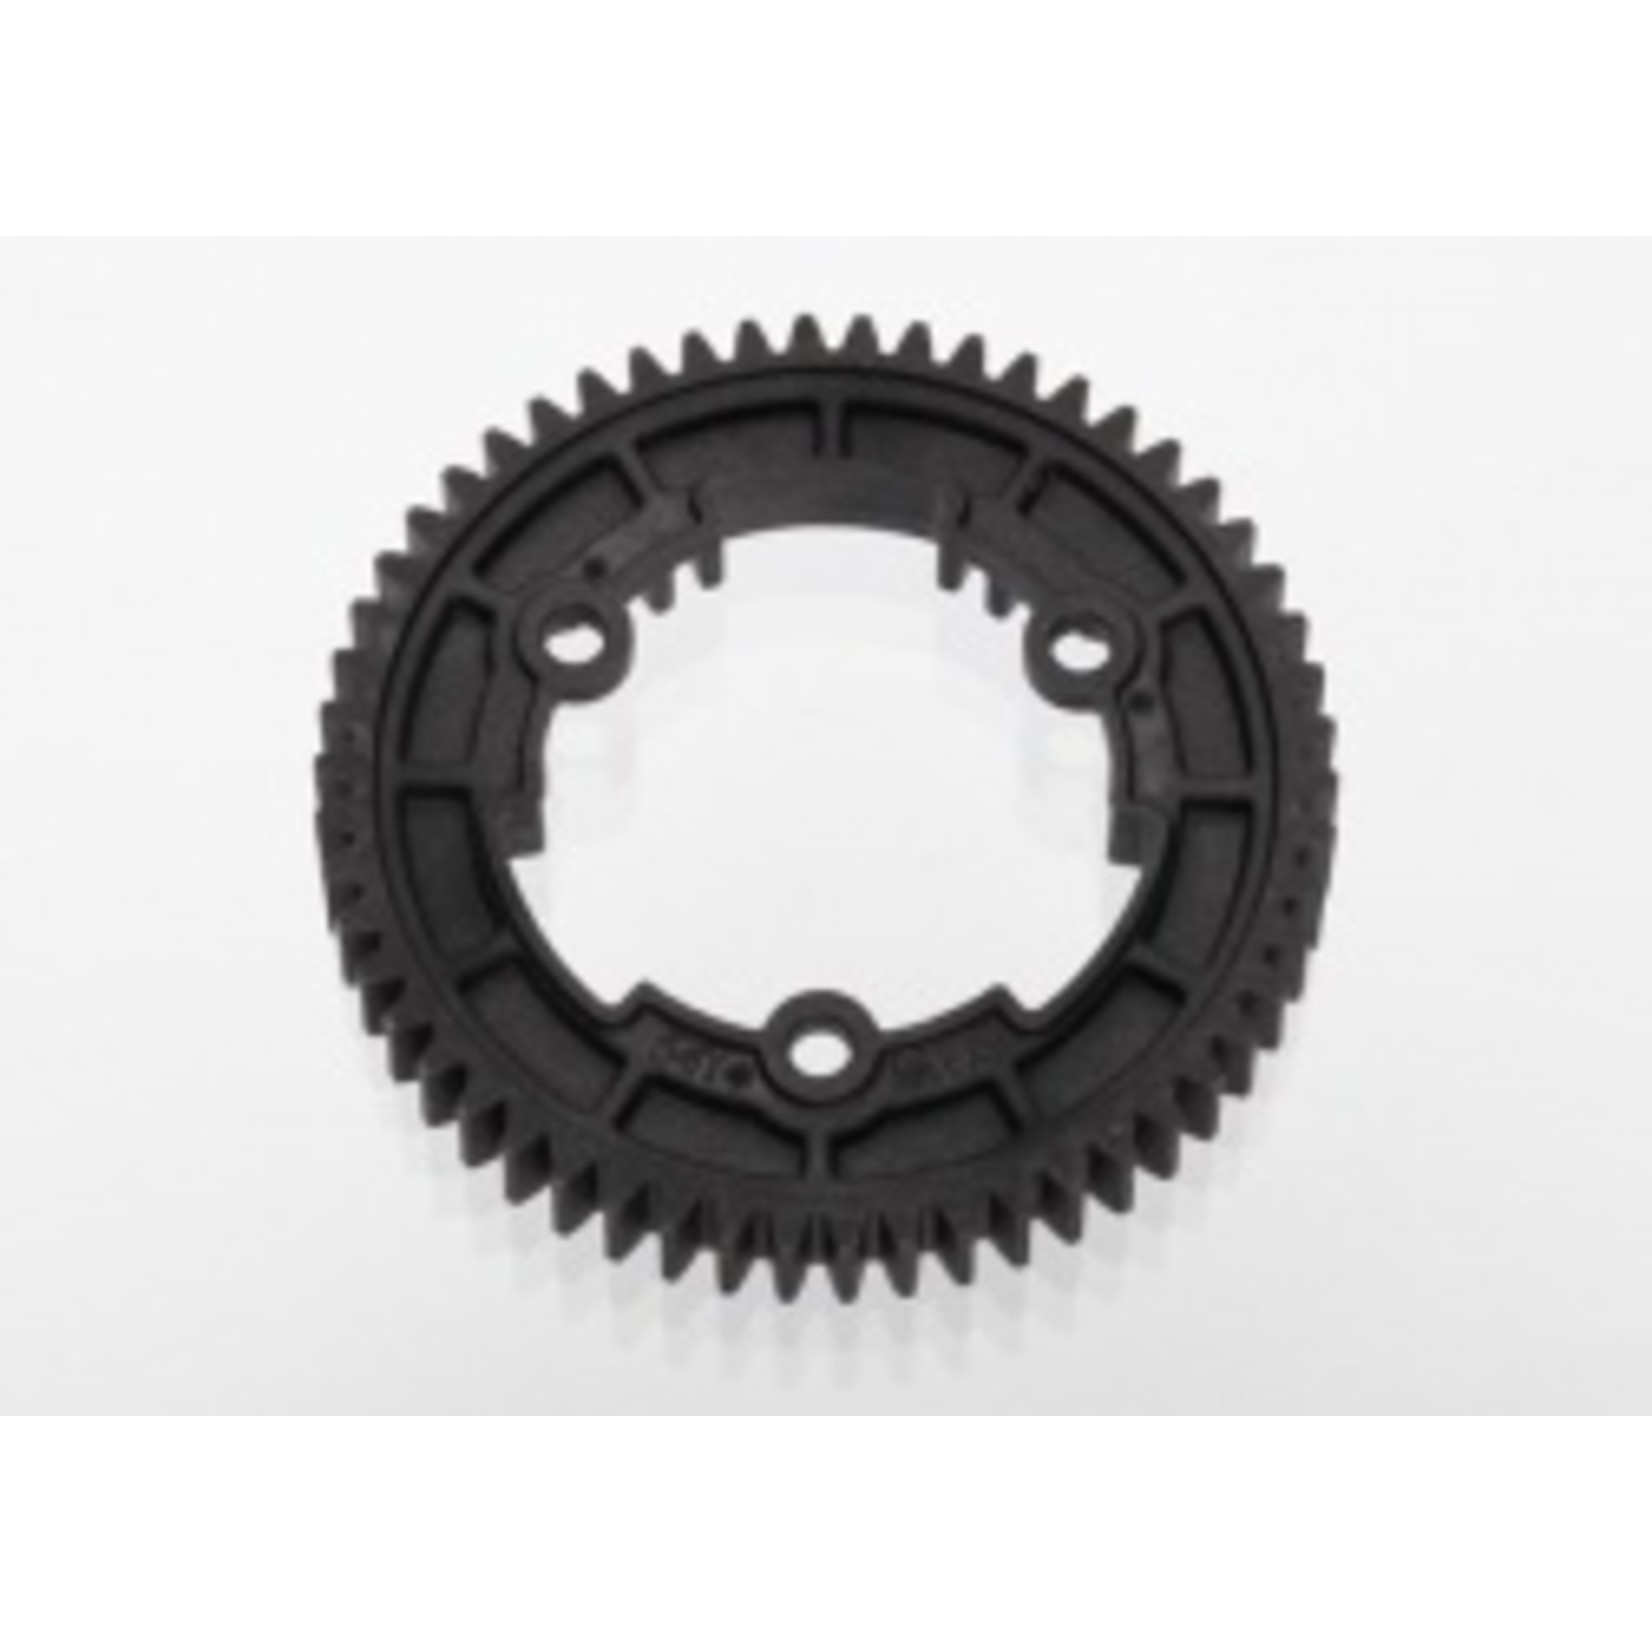 Traxxas 6449  Spur gear, 54-tooth (1.0 metric pitch)